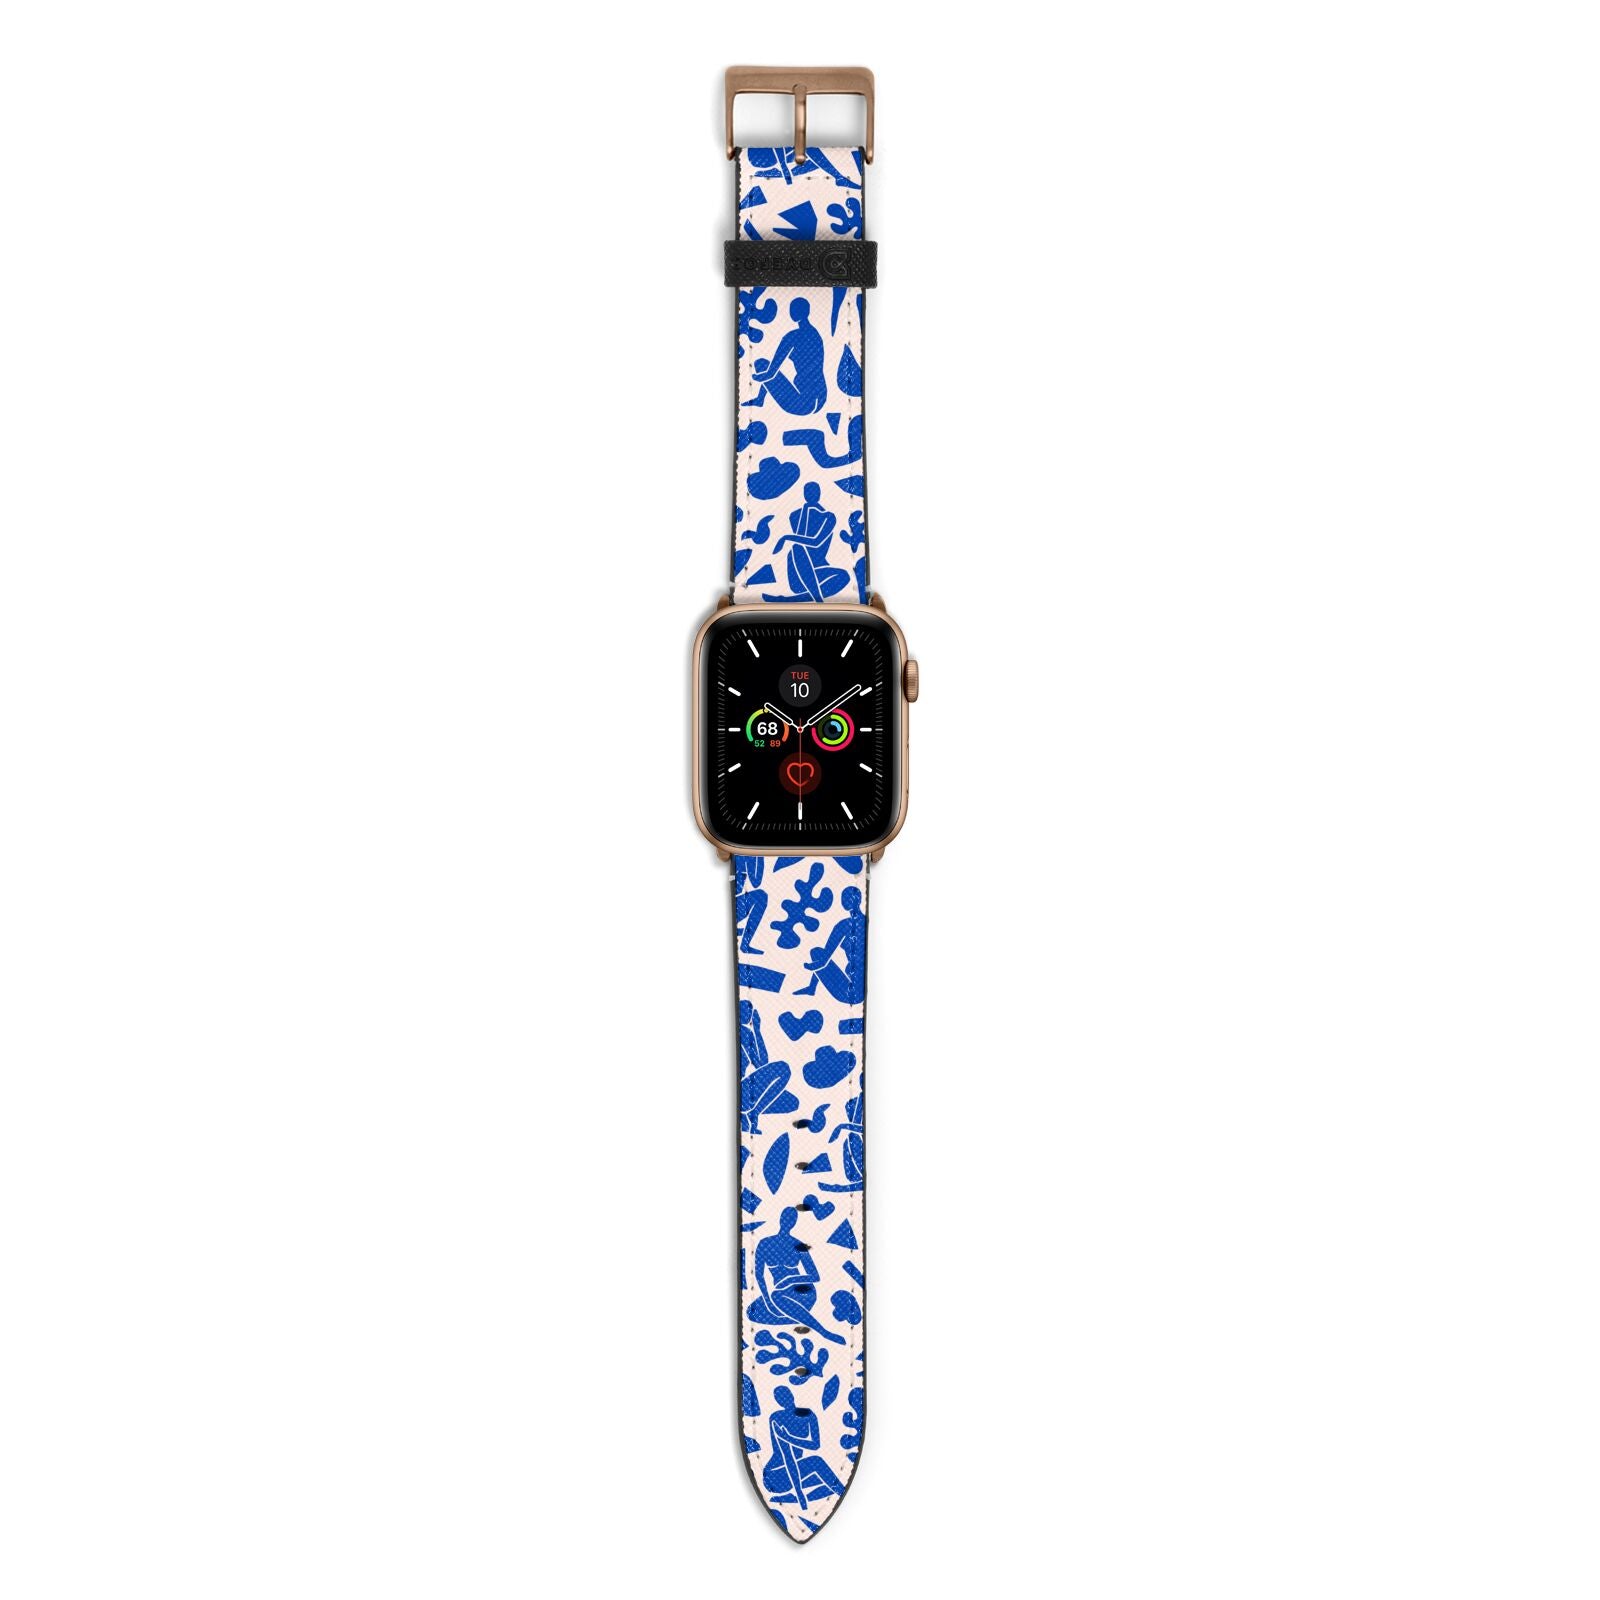 Abstract Art Apple Watch Strap with Gold Hardware